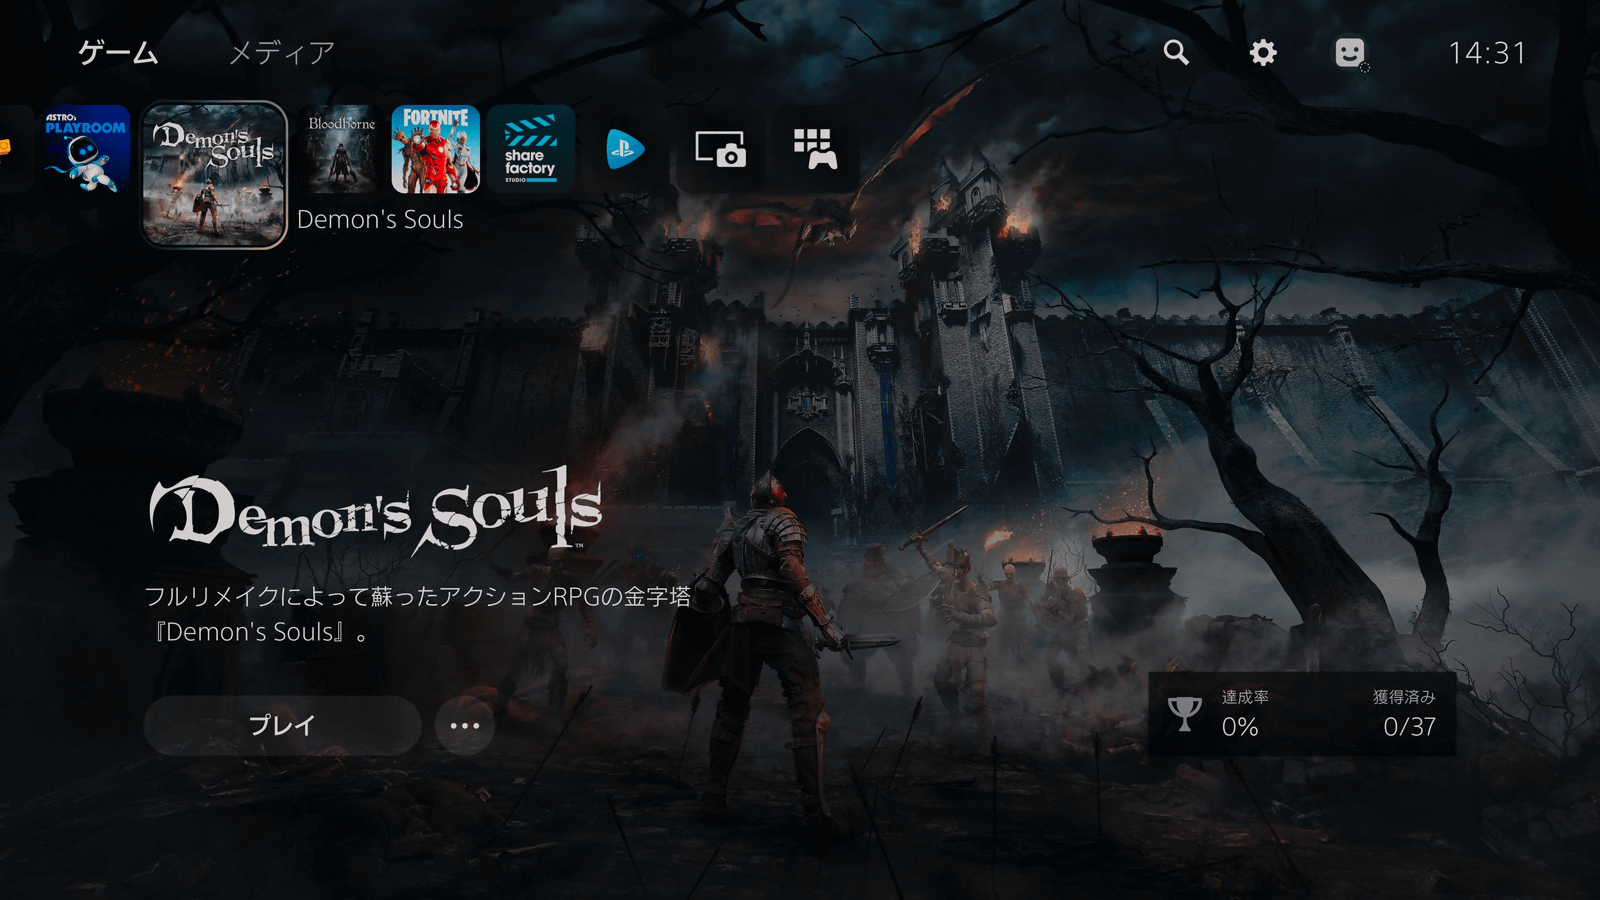 Play Review Of Demon S Souls And Devil May Cry 5 Special Edition Released At The Same Time As Playstation 5 And Enjoyed The Next Generation Game Experience With Super High Image Quality Of